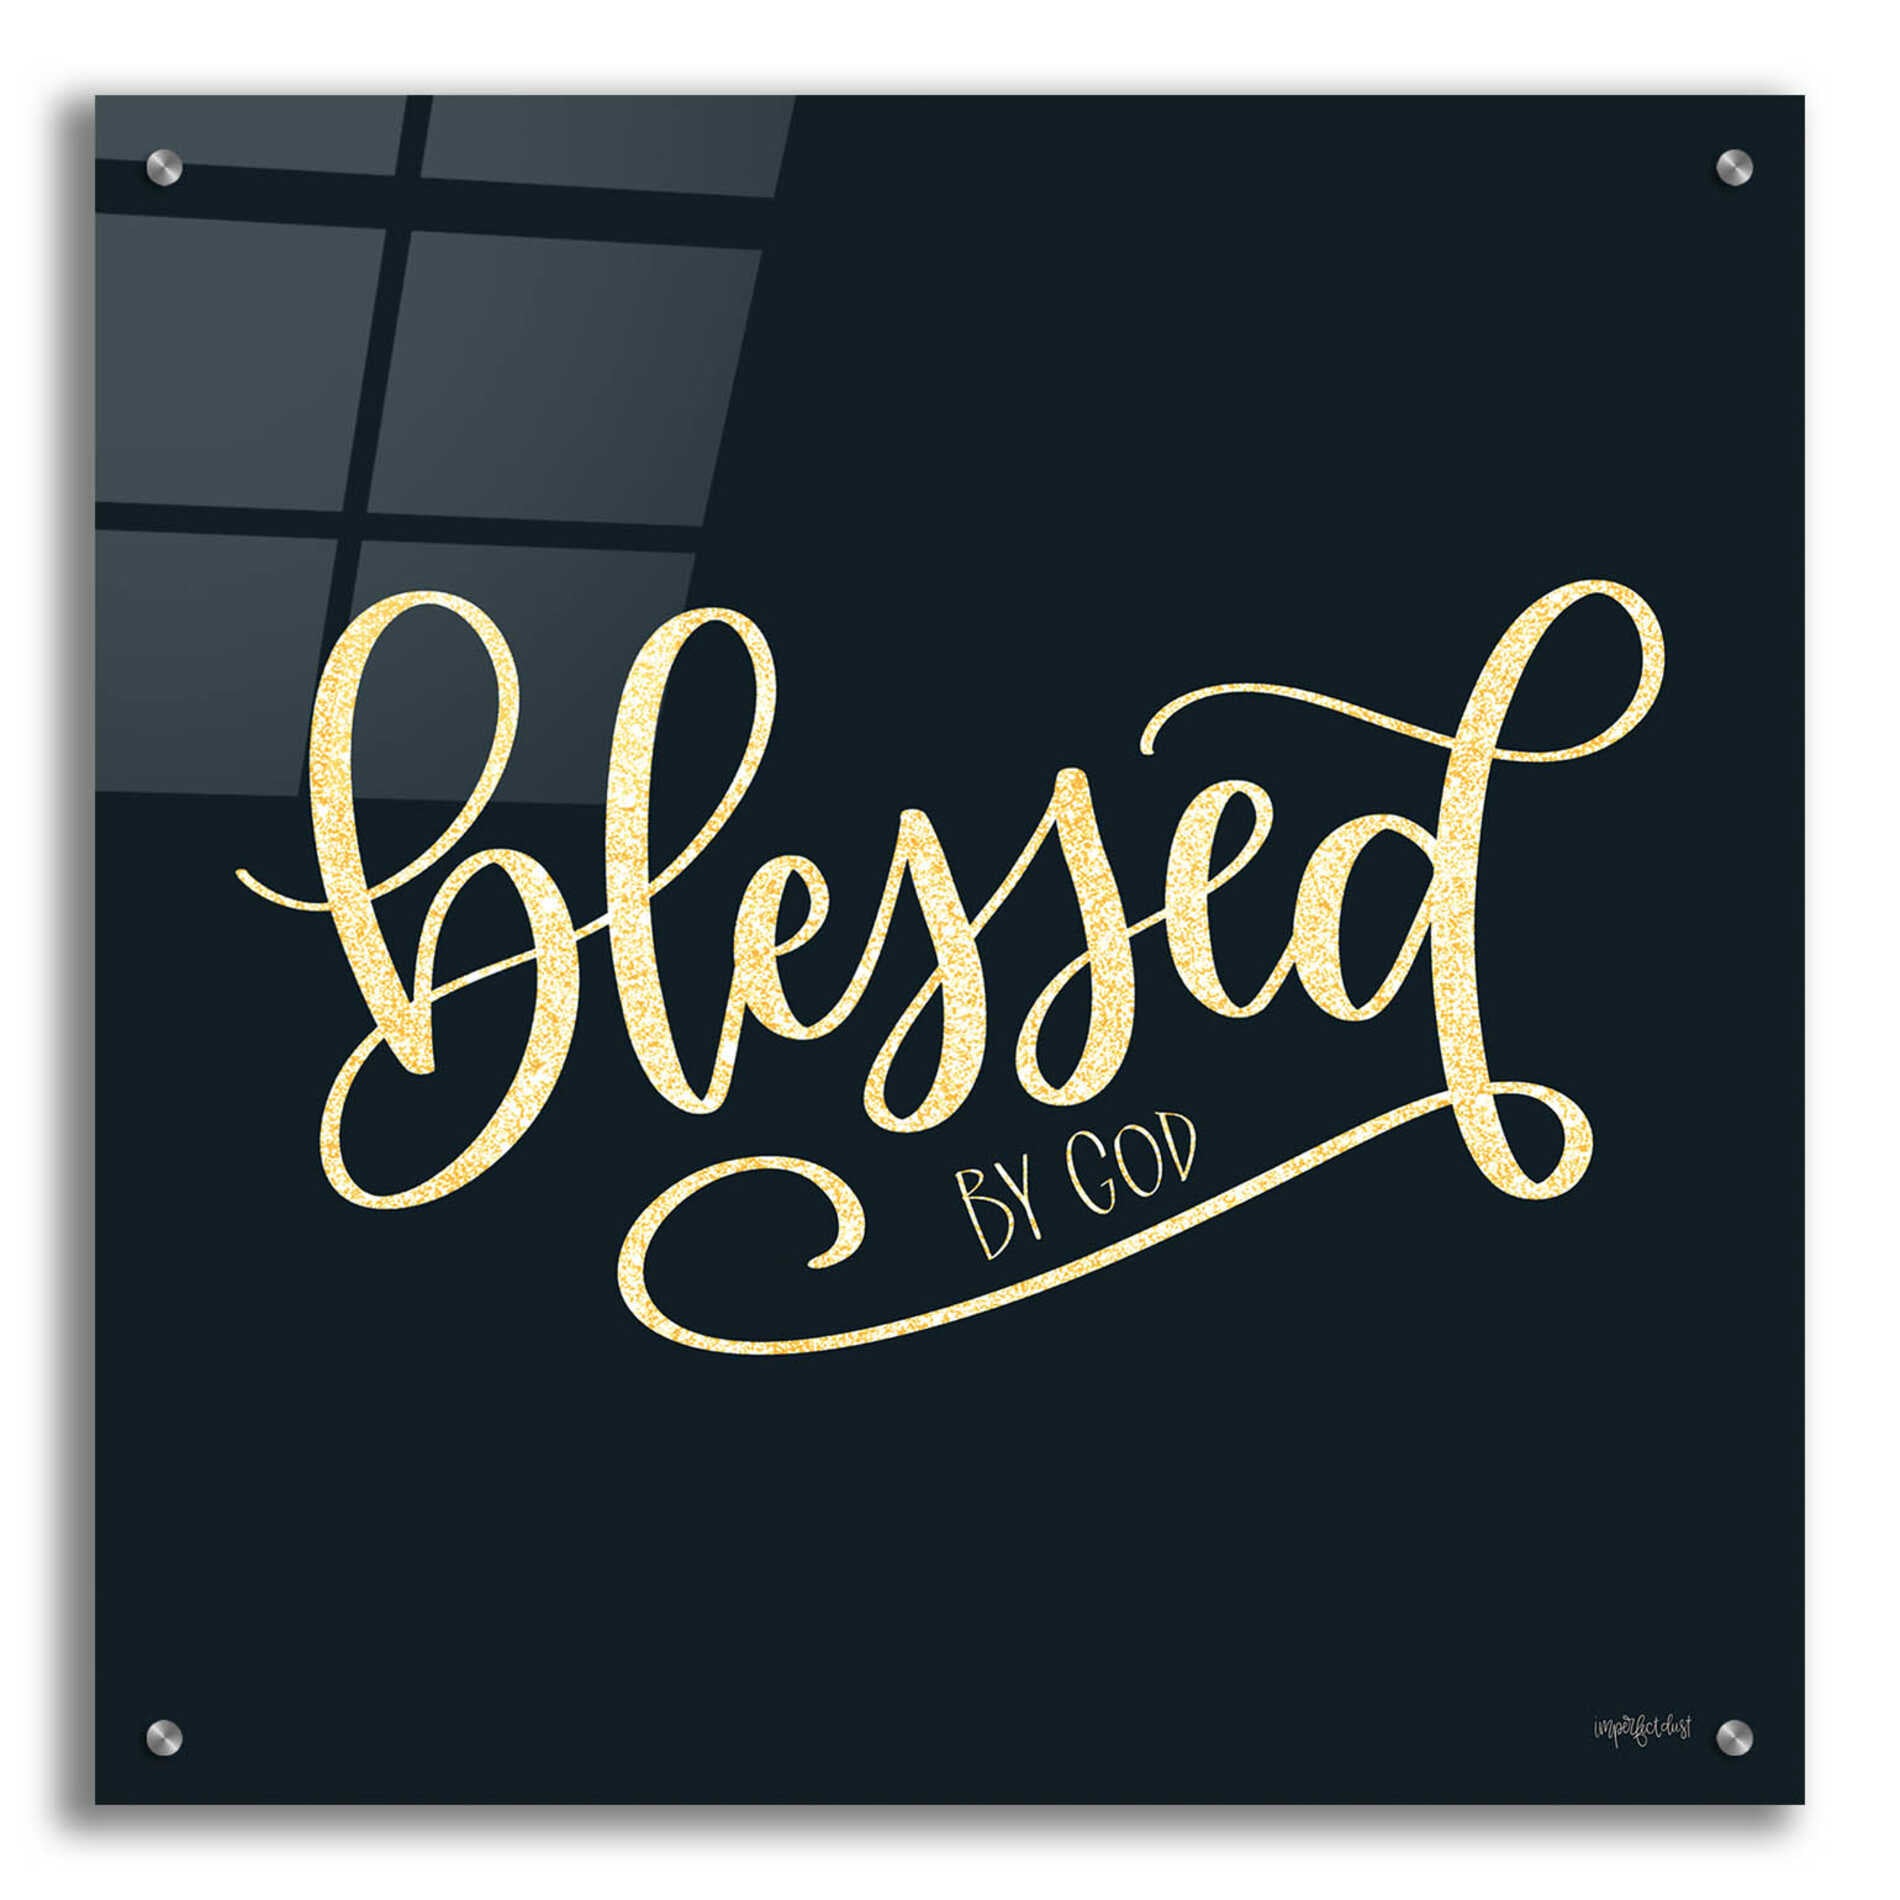 Epic Art 'Blessed By God' by Imperfect Dust, Acrylic Glass Wall Art,24x24